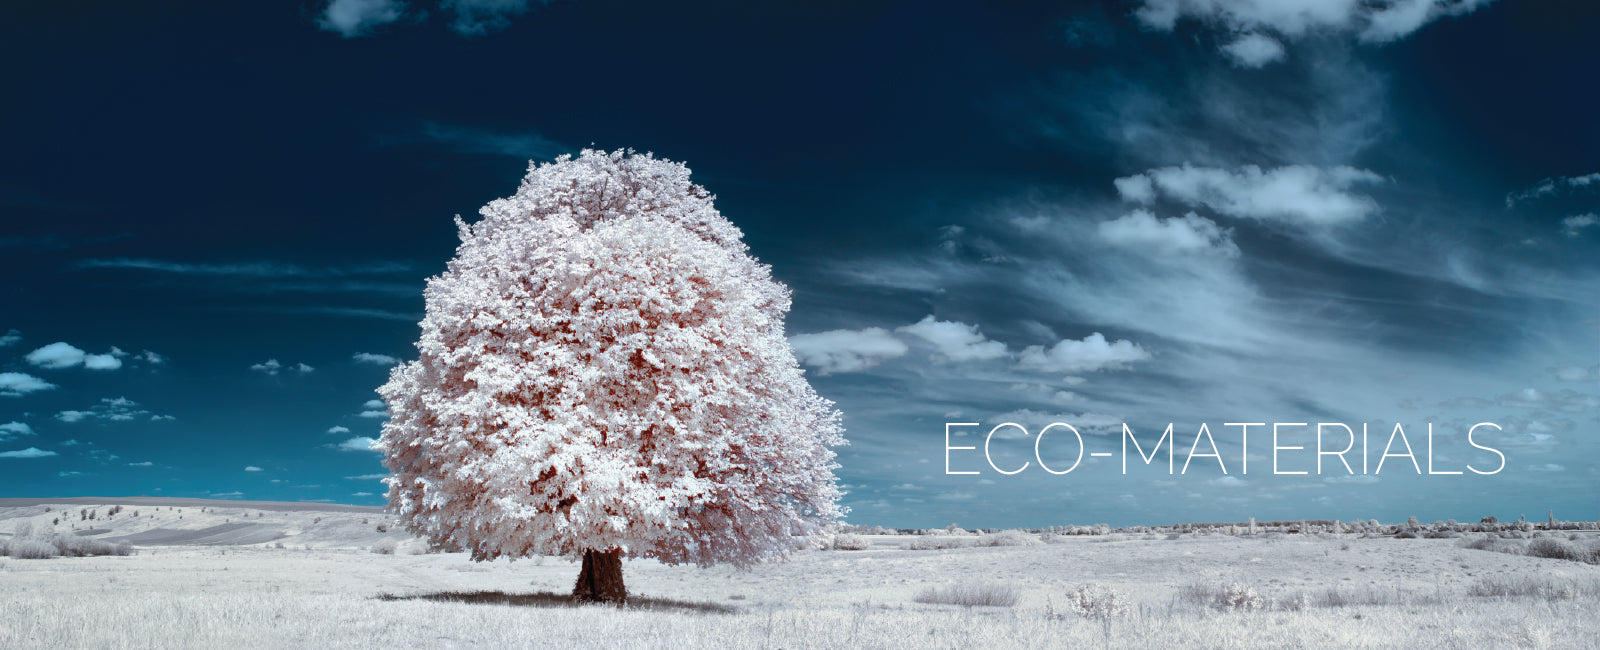 ECO-MATERIAL